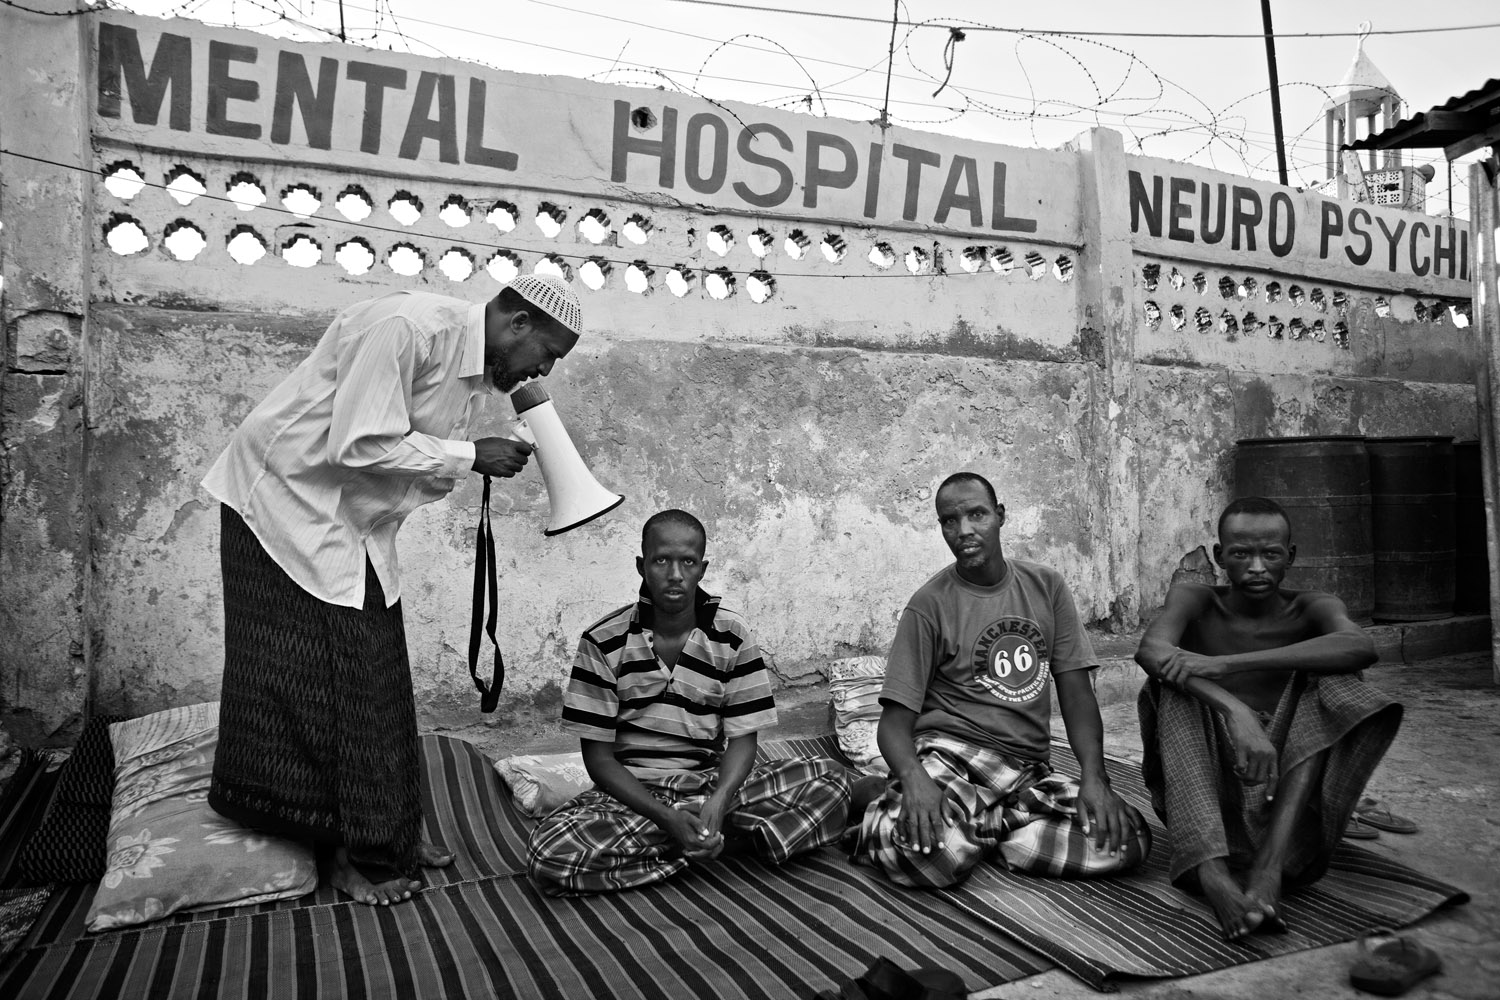 Many Somalis will take their mentally ill relative to traditional or Quranic healers for treatment. Mogadishu, Somalia. May 2011.